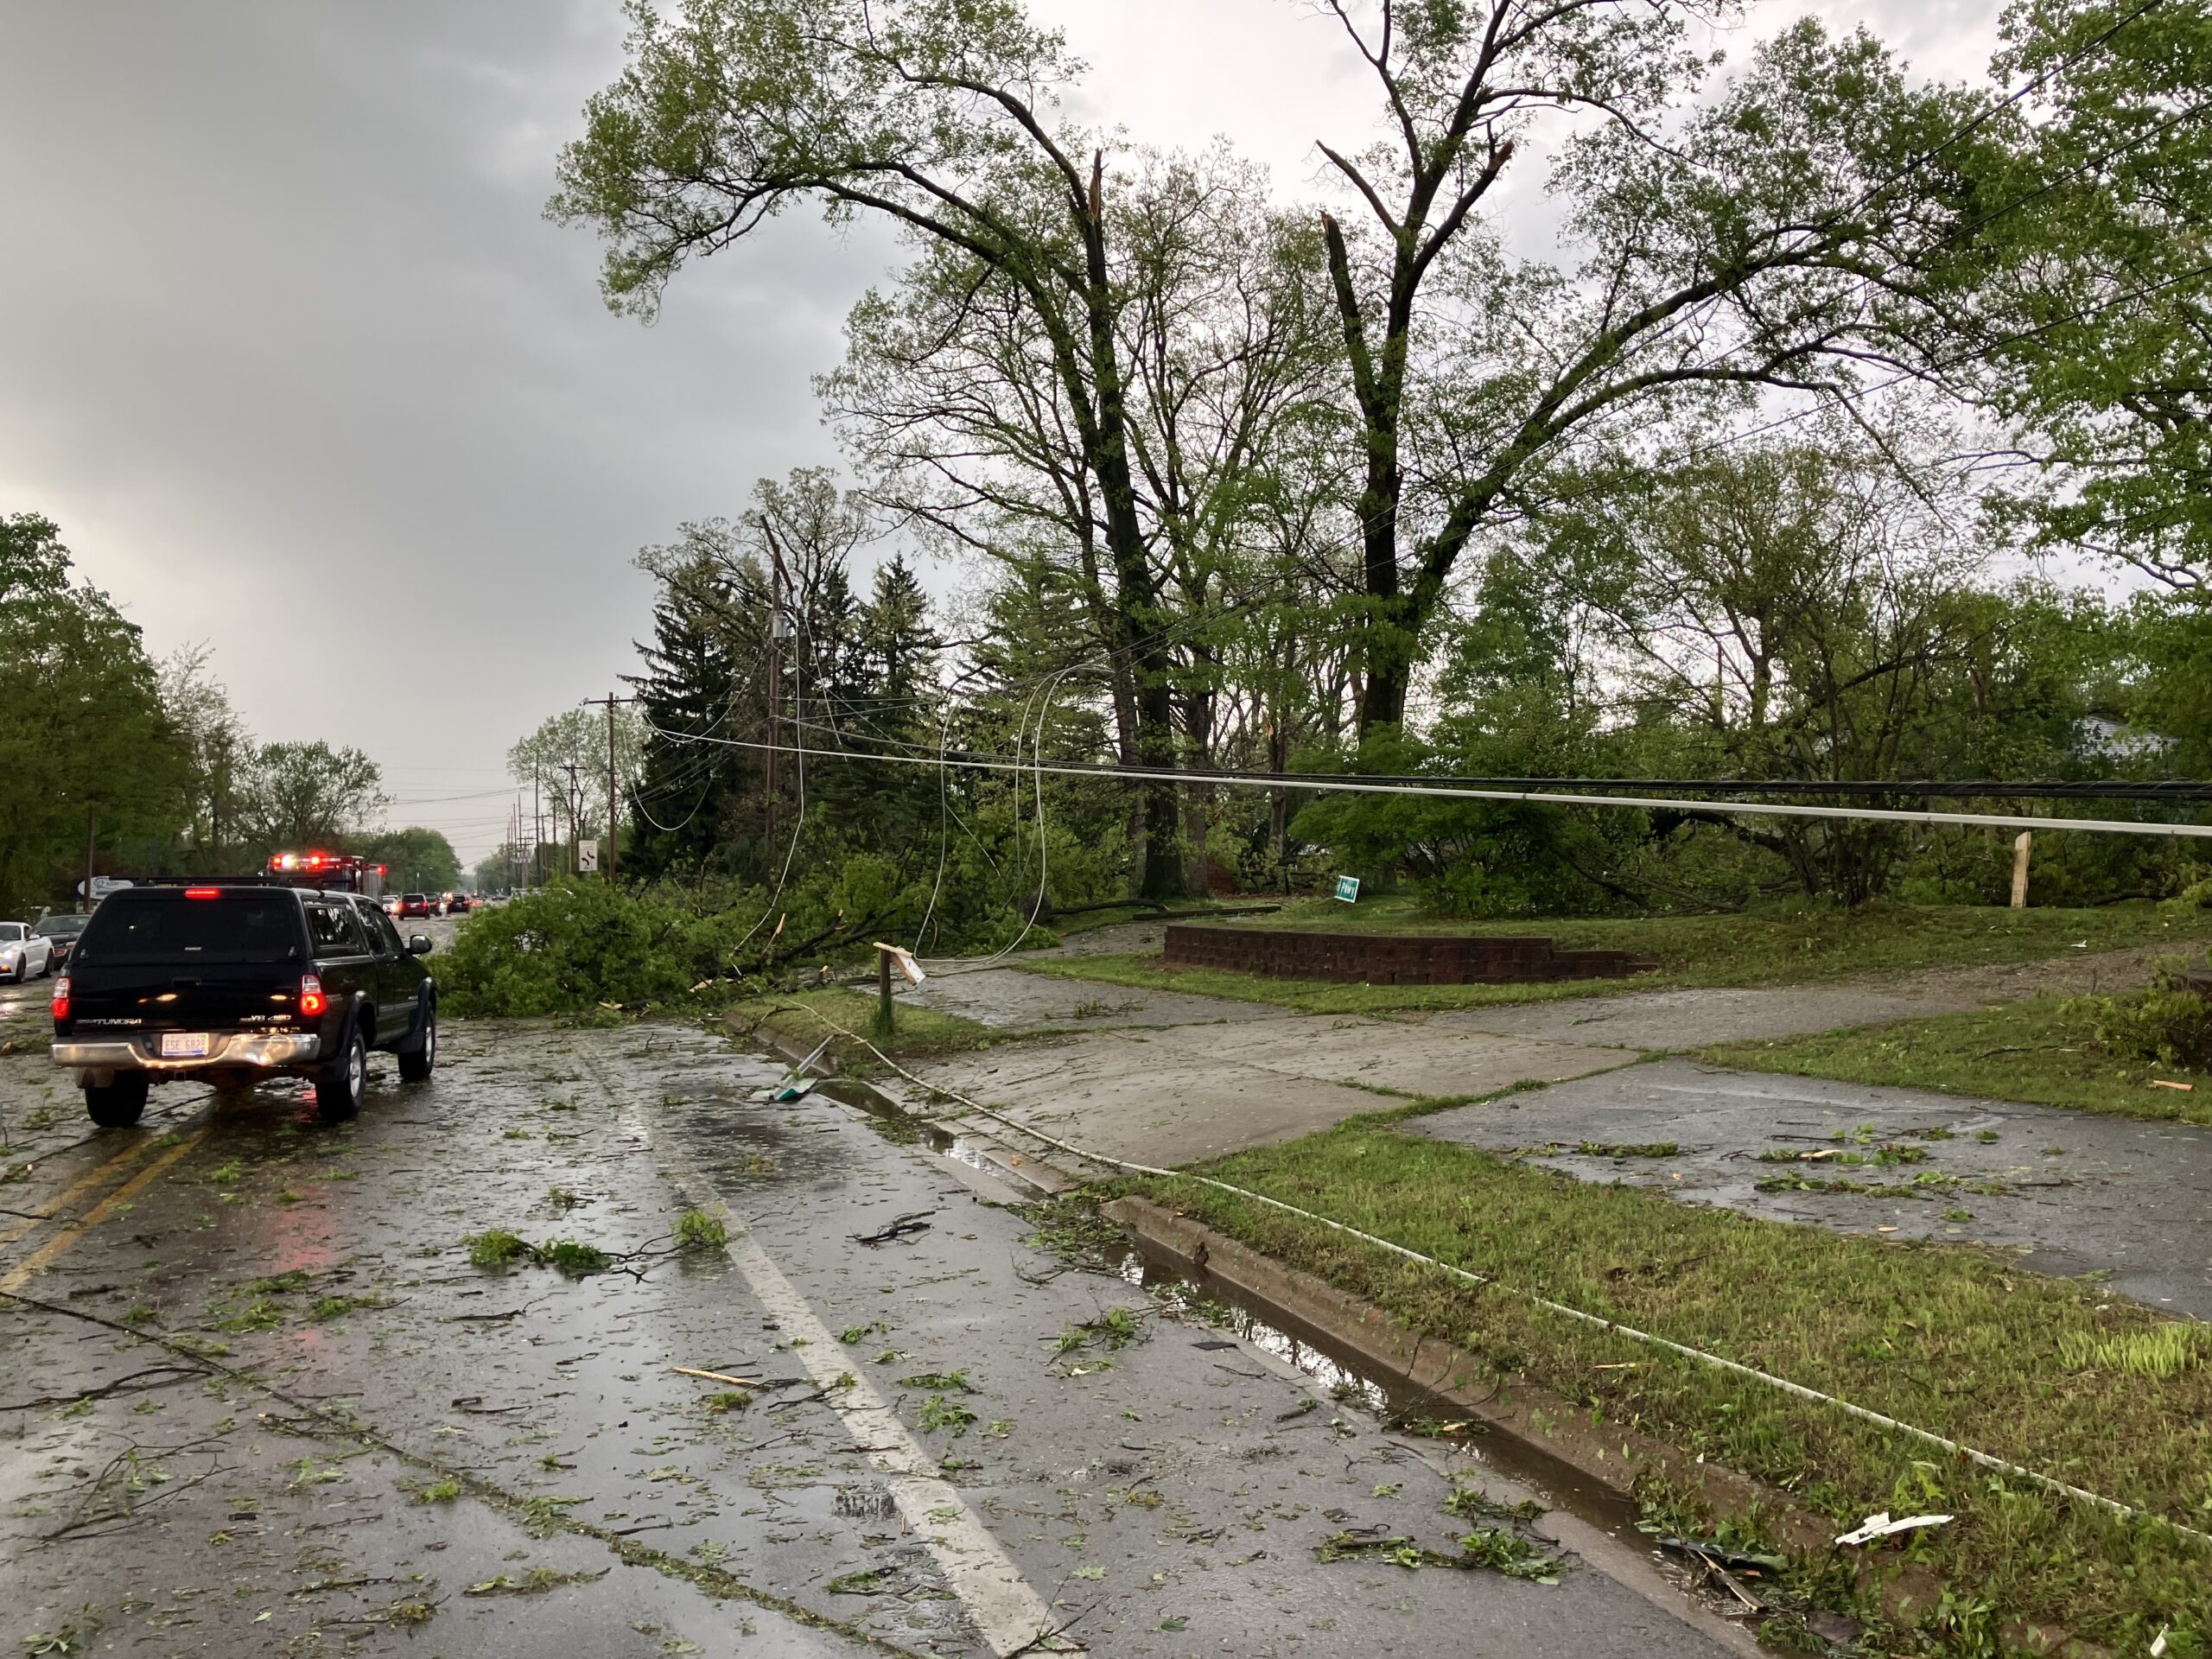 Image of a road littered with leaves and debris, with emergency response vehicle parked in the center of the road.